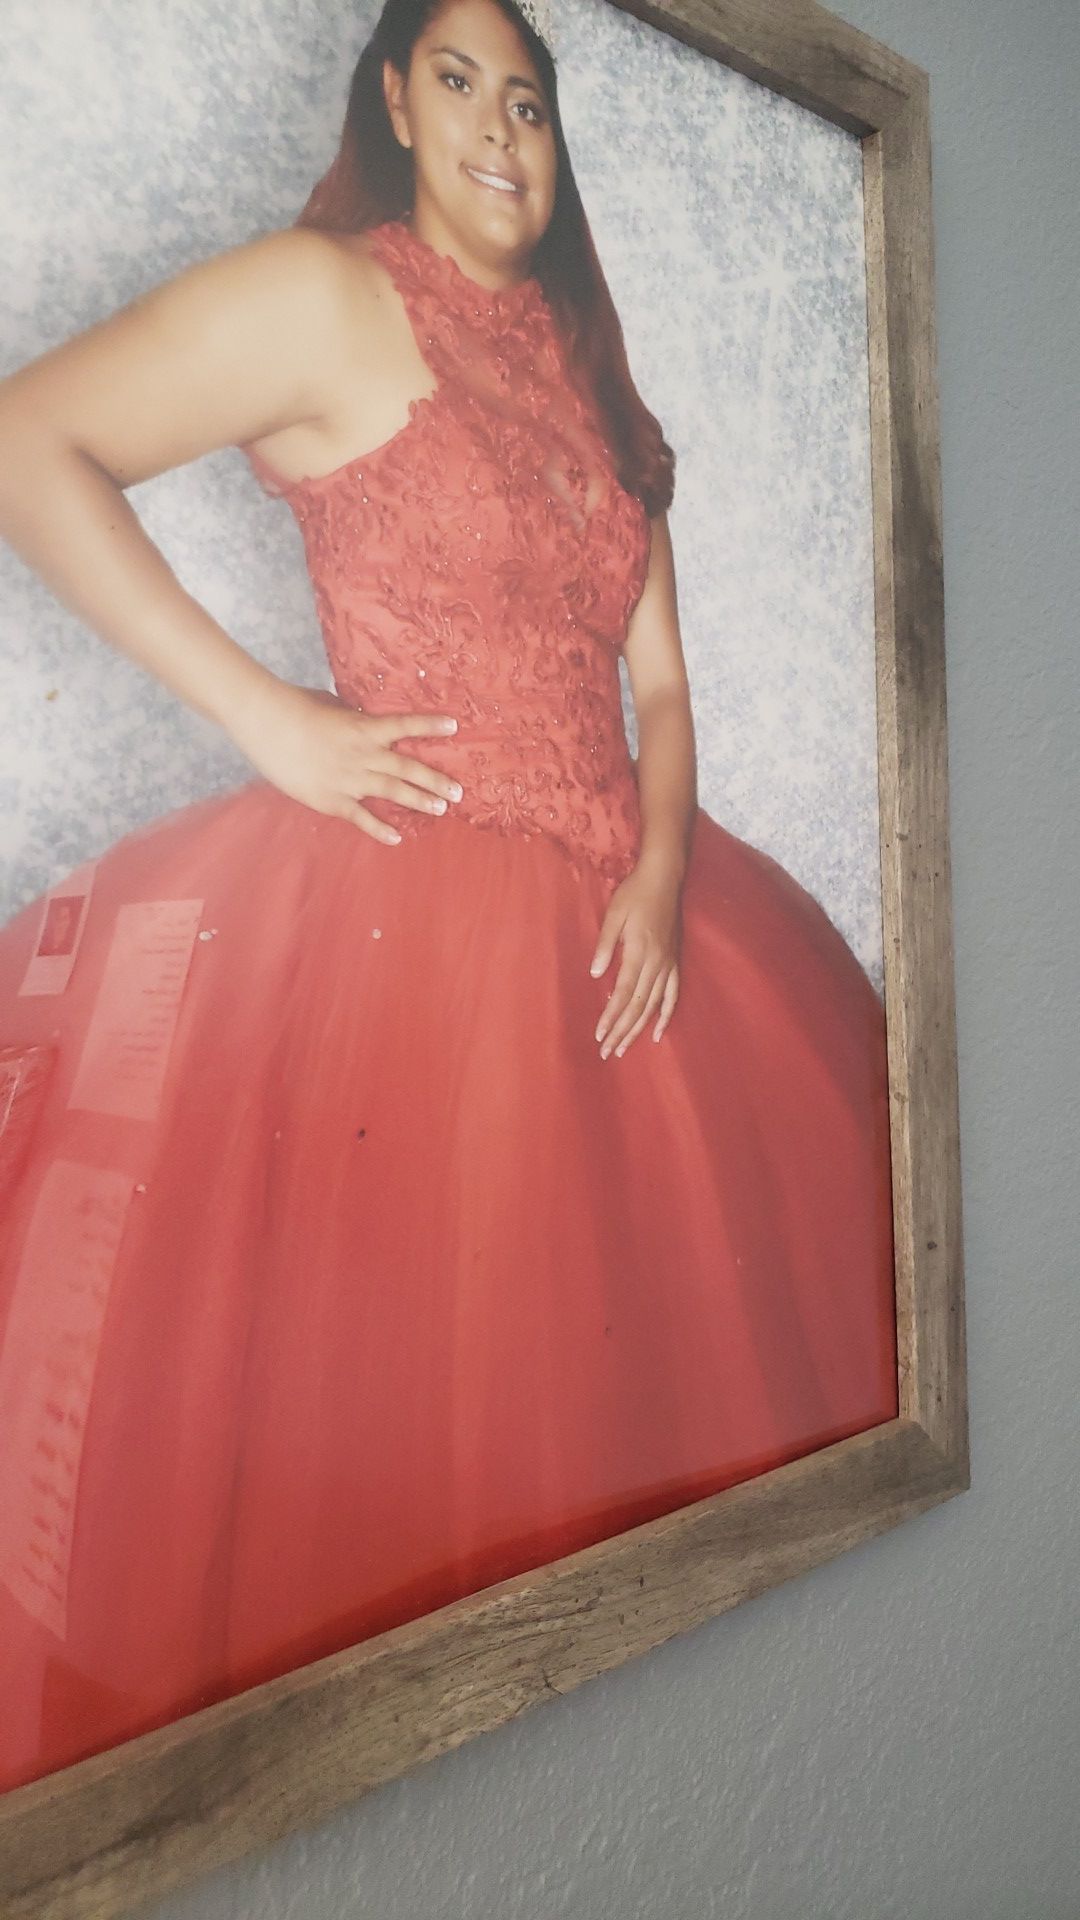 Red quinceanera dress